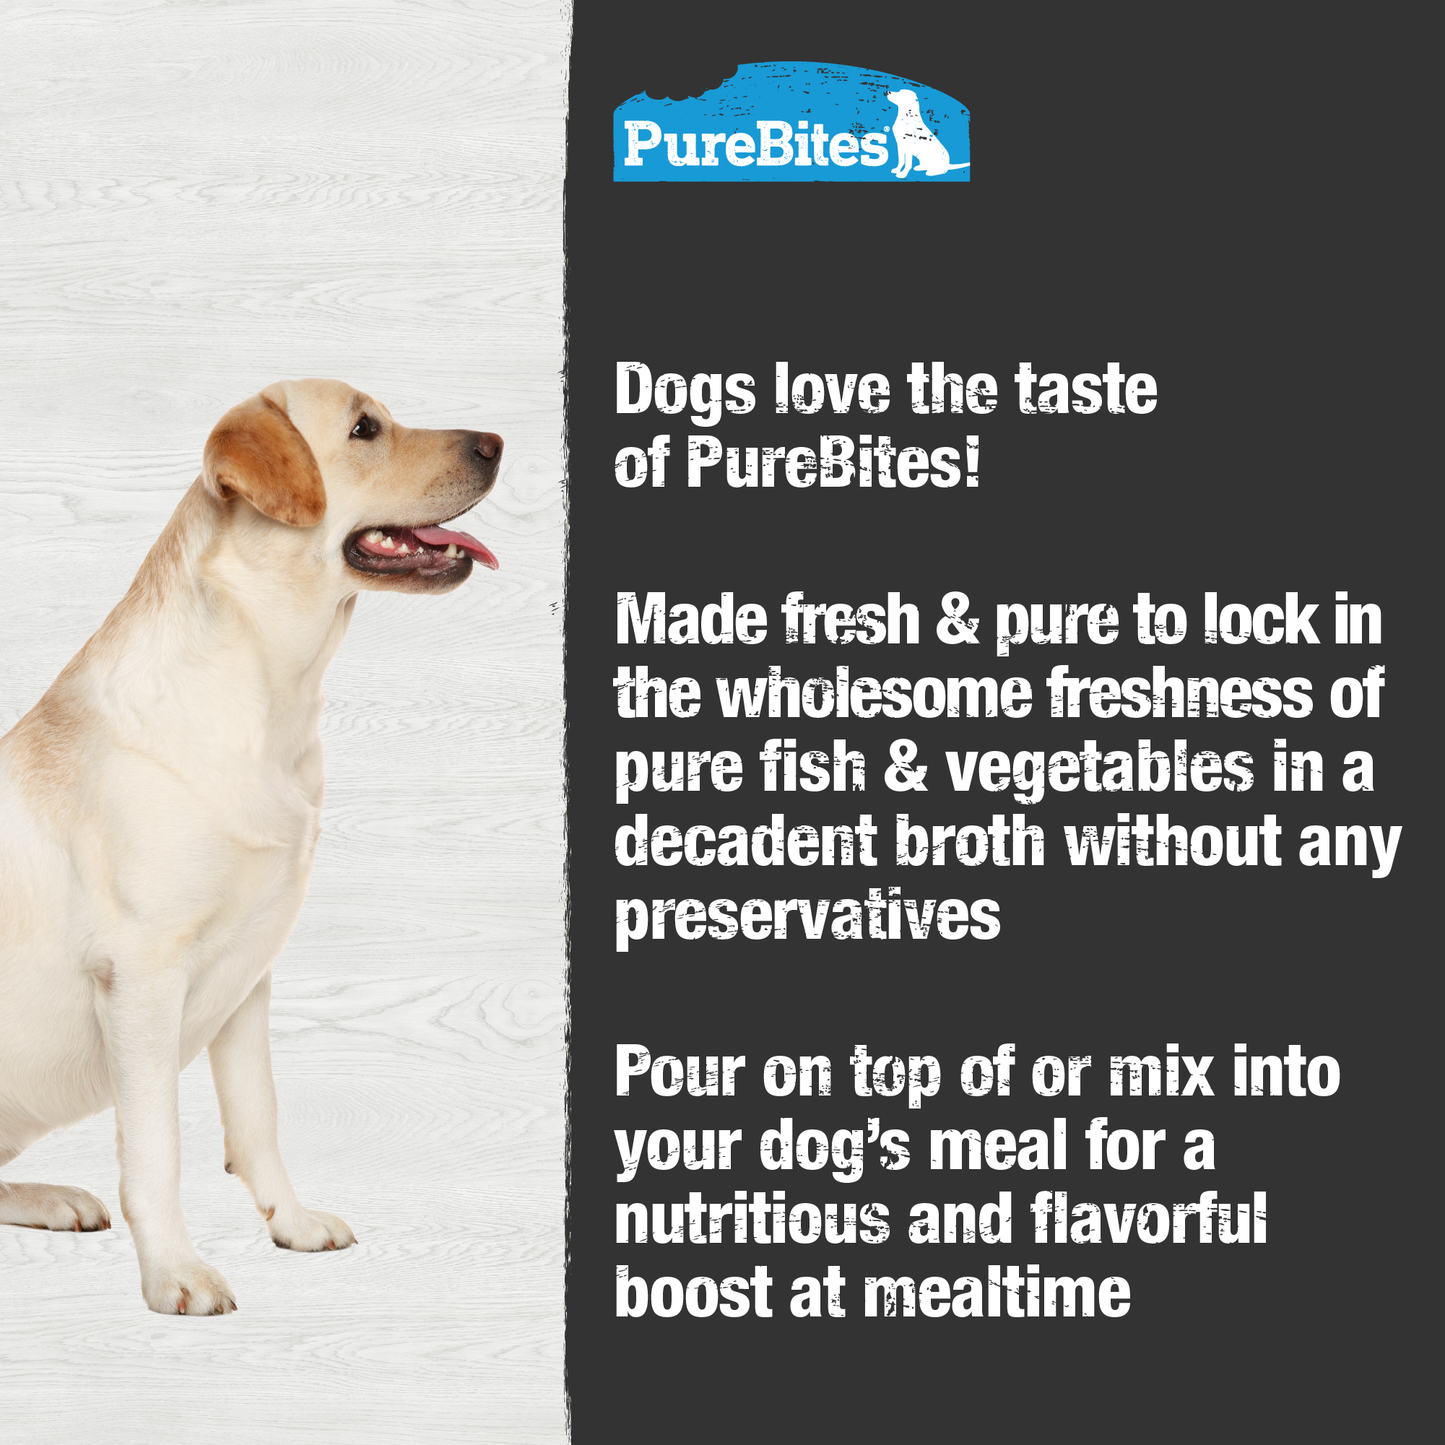 Made fresh & pure means more protein and nutrients packed into every pouch. With only tuna and vegetables in a rich broth, it provides superior nutrition and mirrors a dog's ancestral diet.